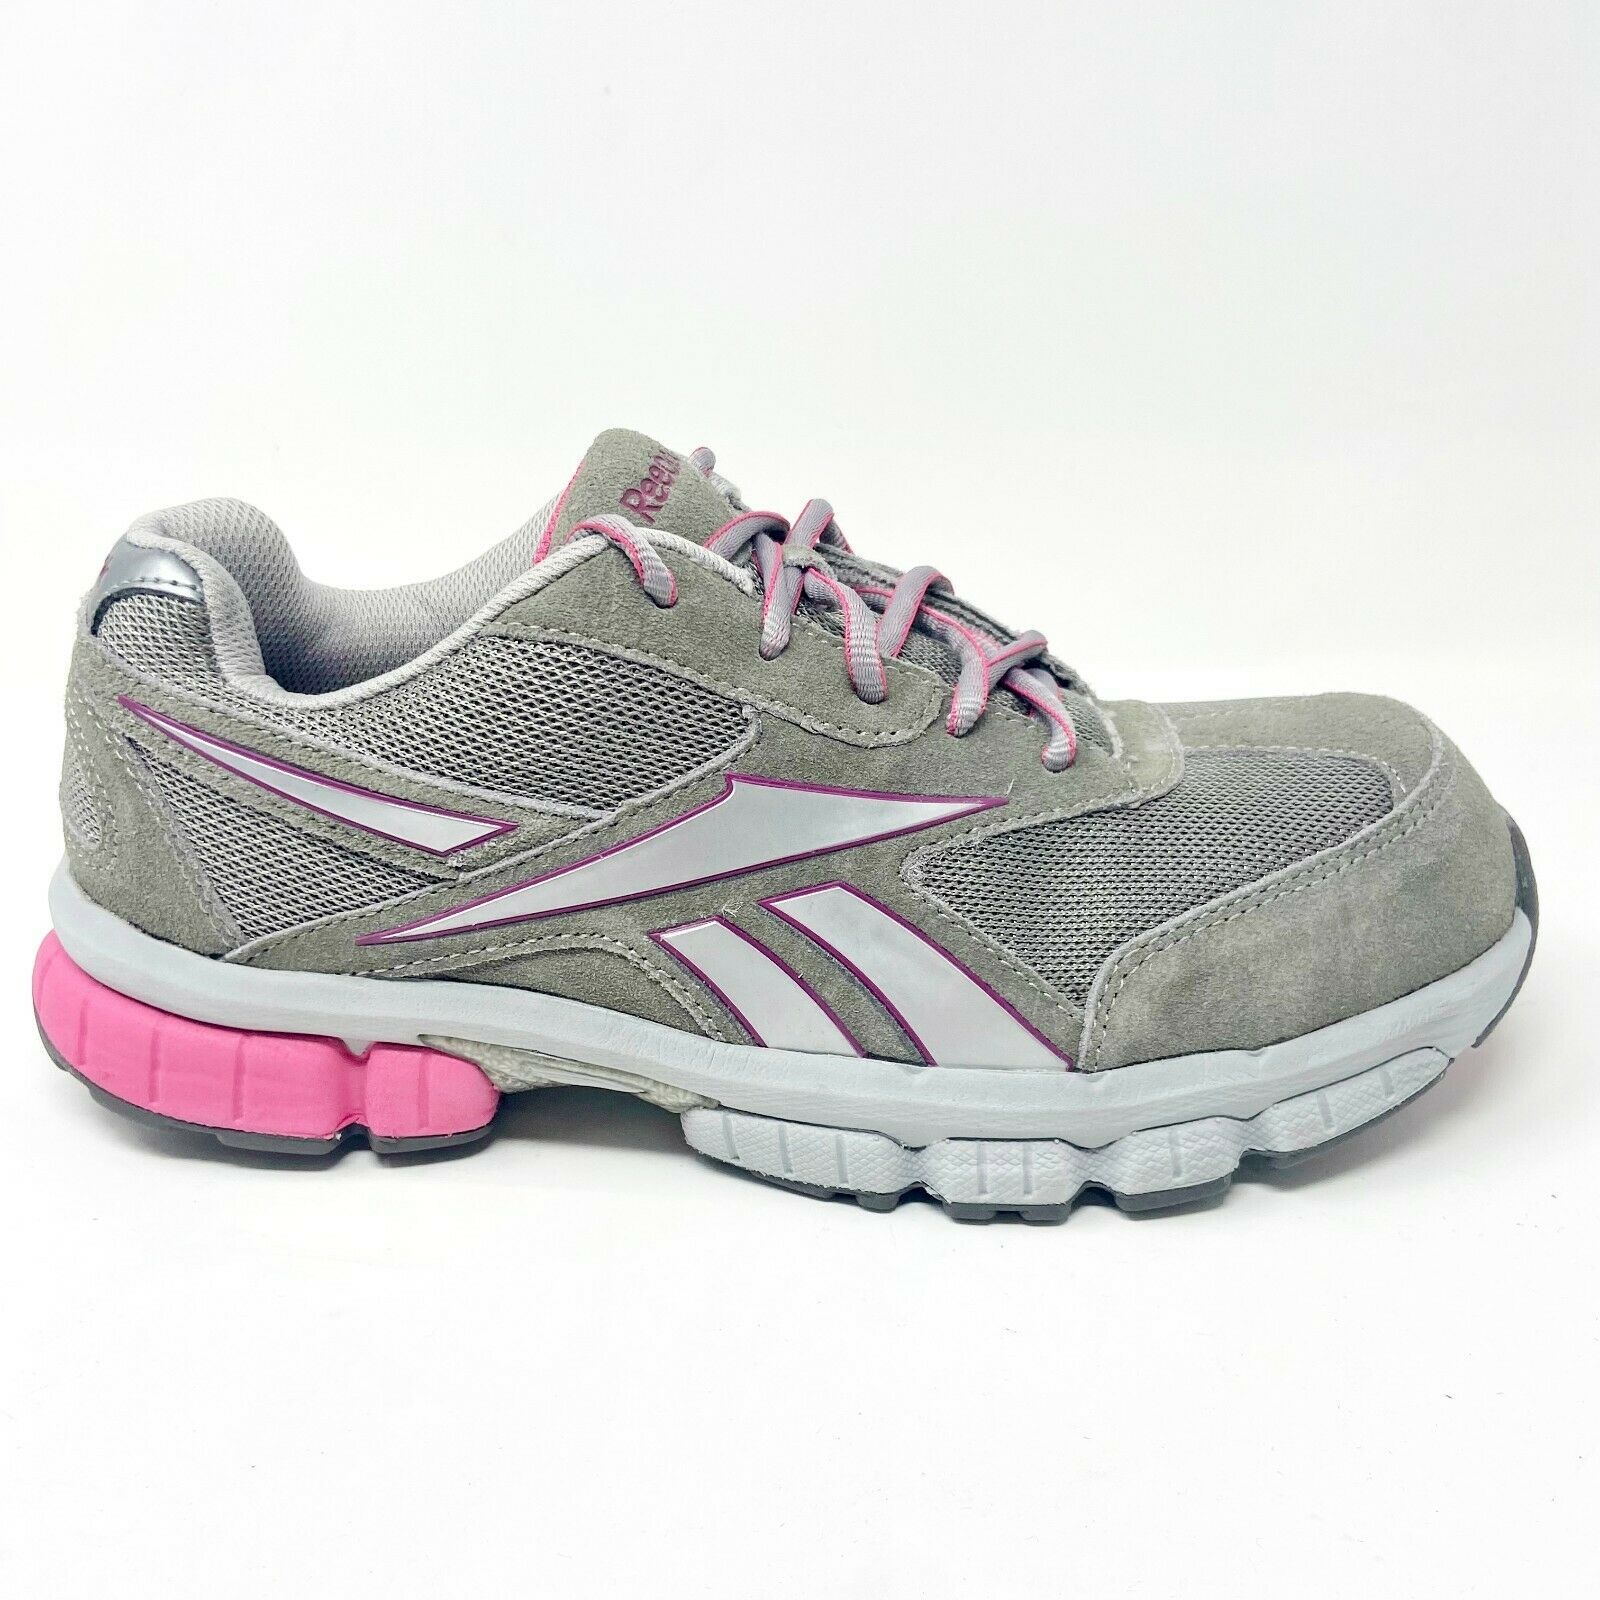 Reebok Work Turnover Grey Pink Oxford Womens Composite Toe Shoes RB445